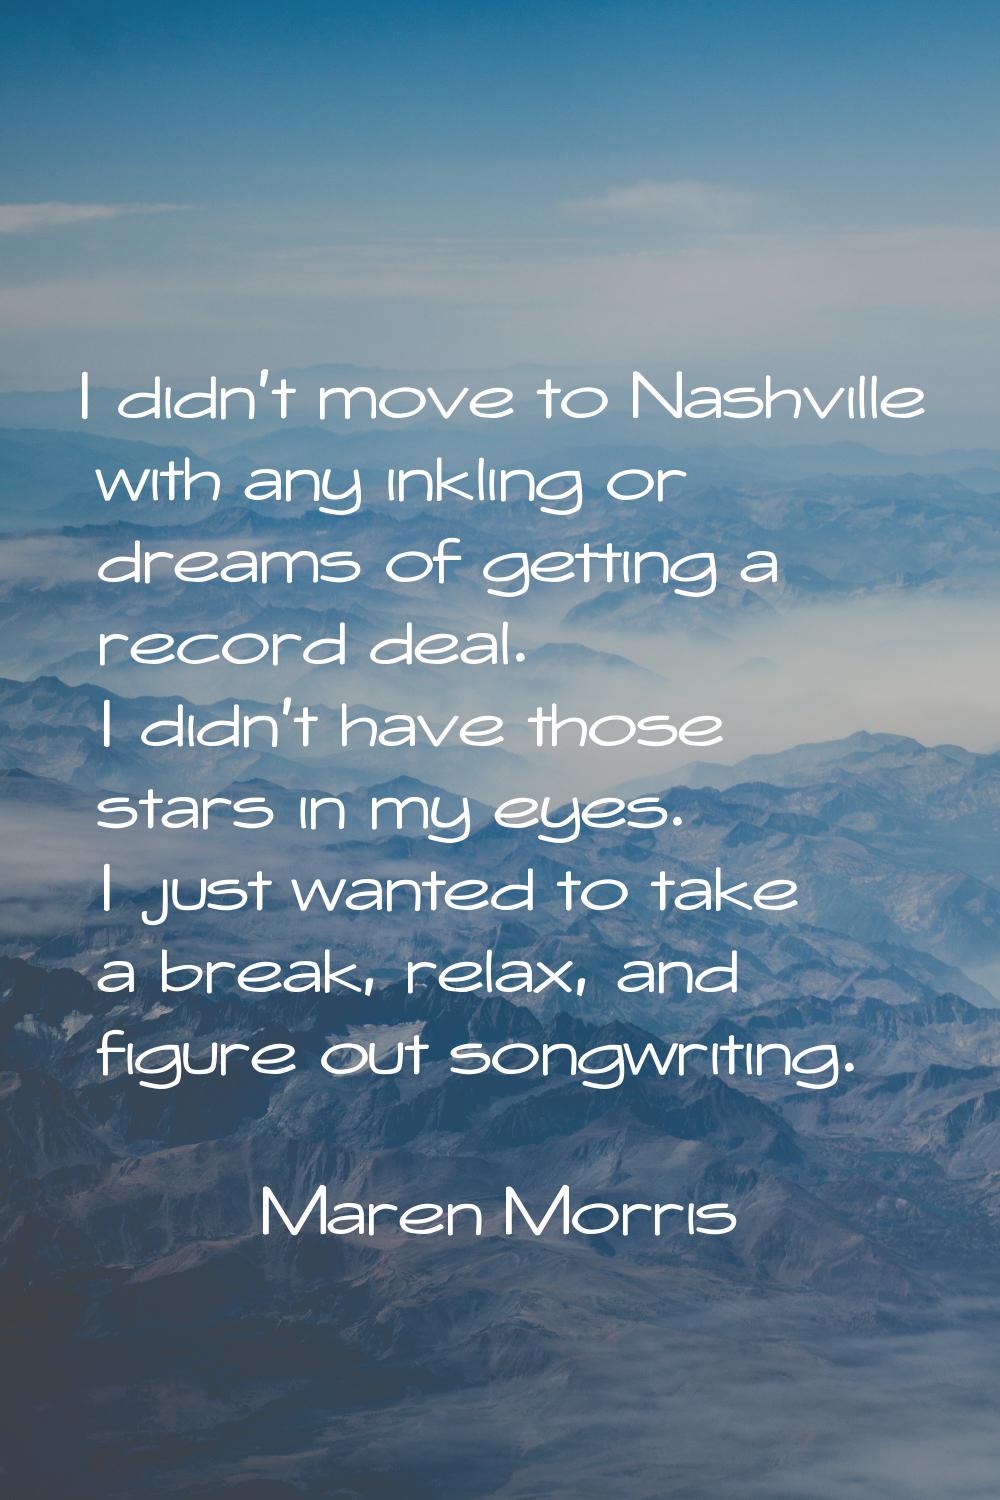 I didn't move to Nashville with any inkling or dreams of getting a record deal. I didn't have those